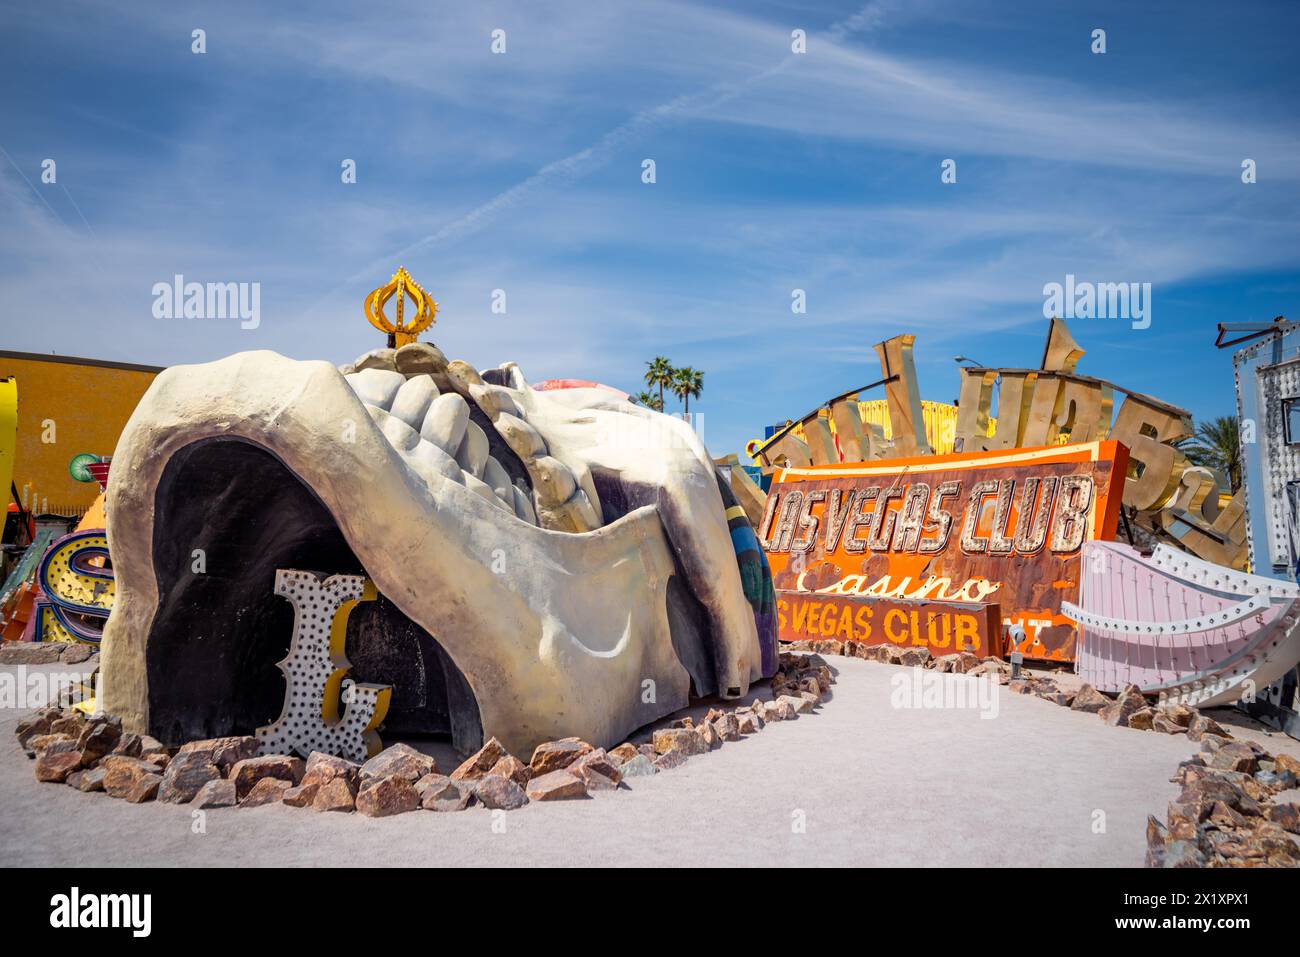 Abandoned and discarded skull sculpture among other abandoned signs in the Neon Museum aka Neon boneyard in Las Vegas, Nevada. Stock Photo